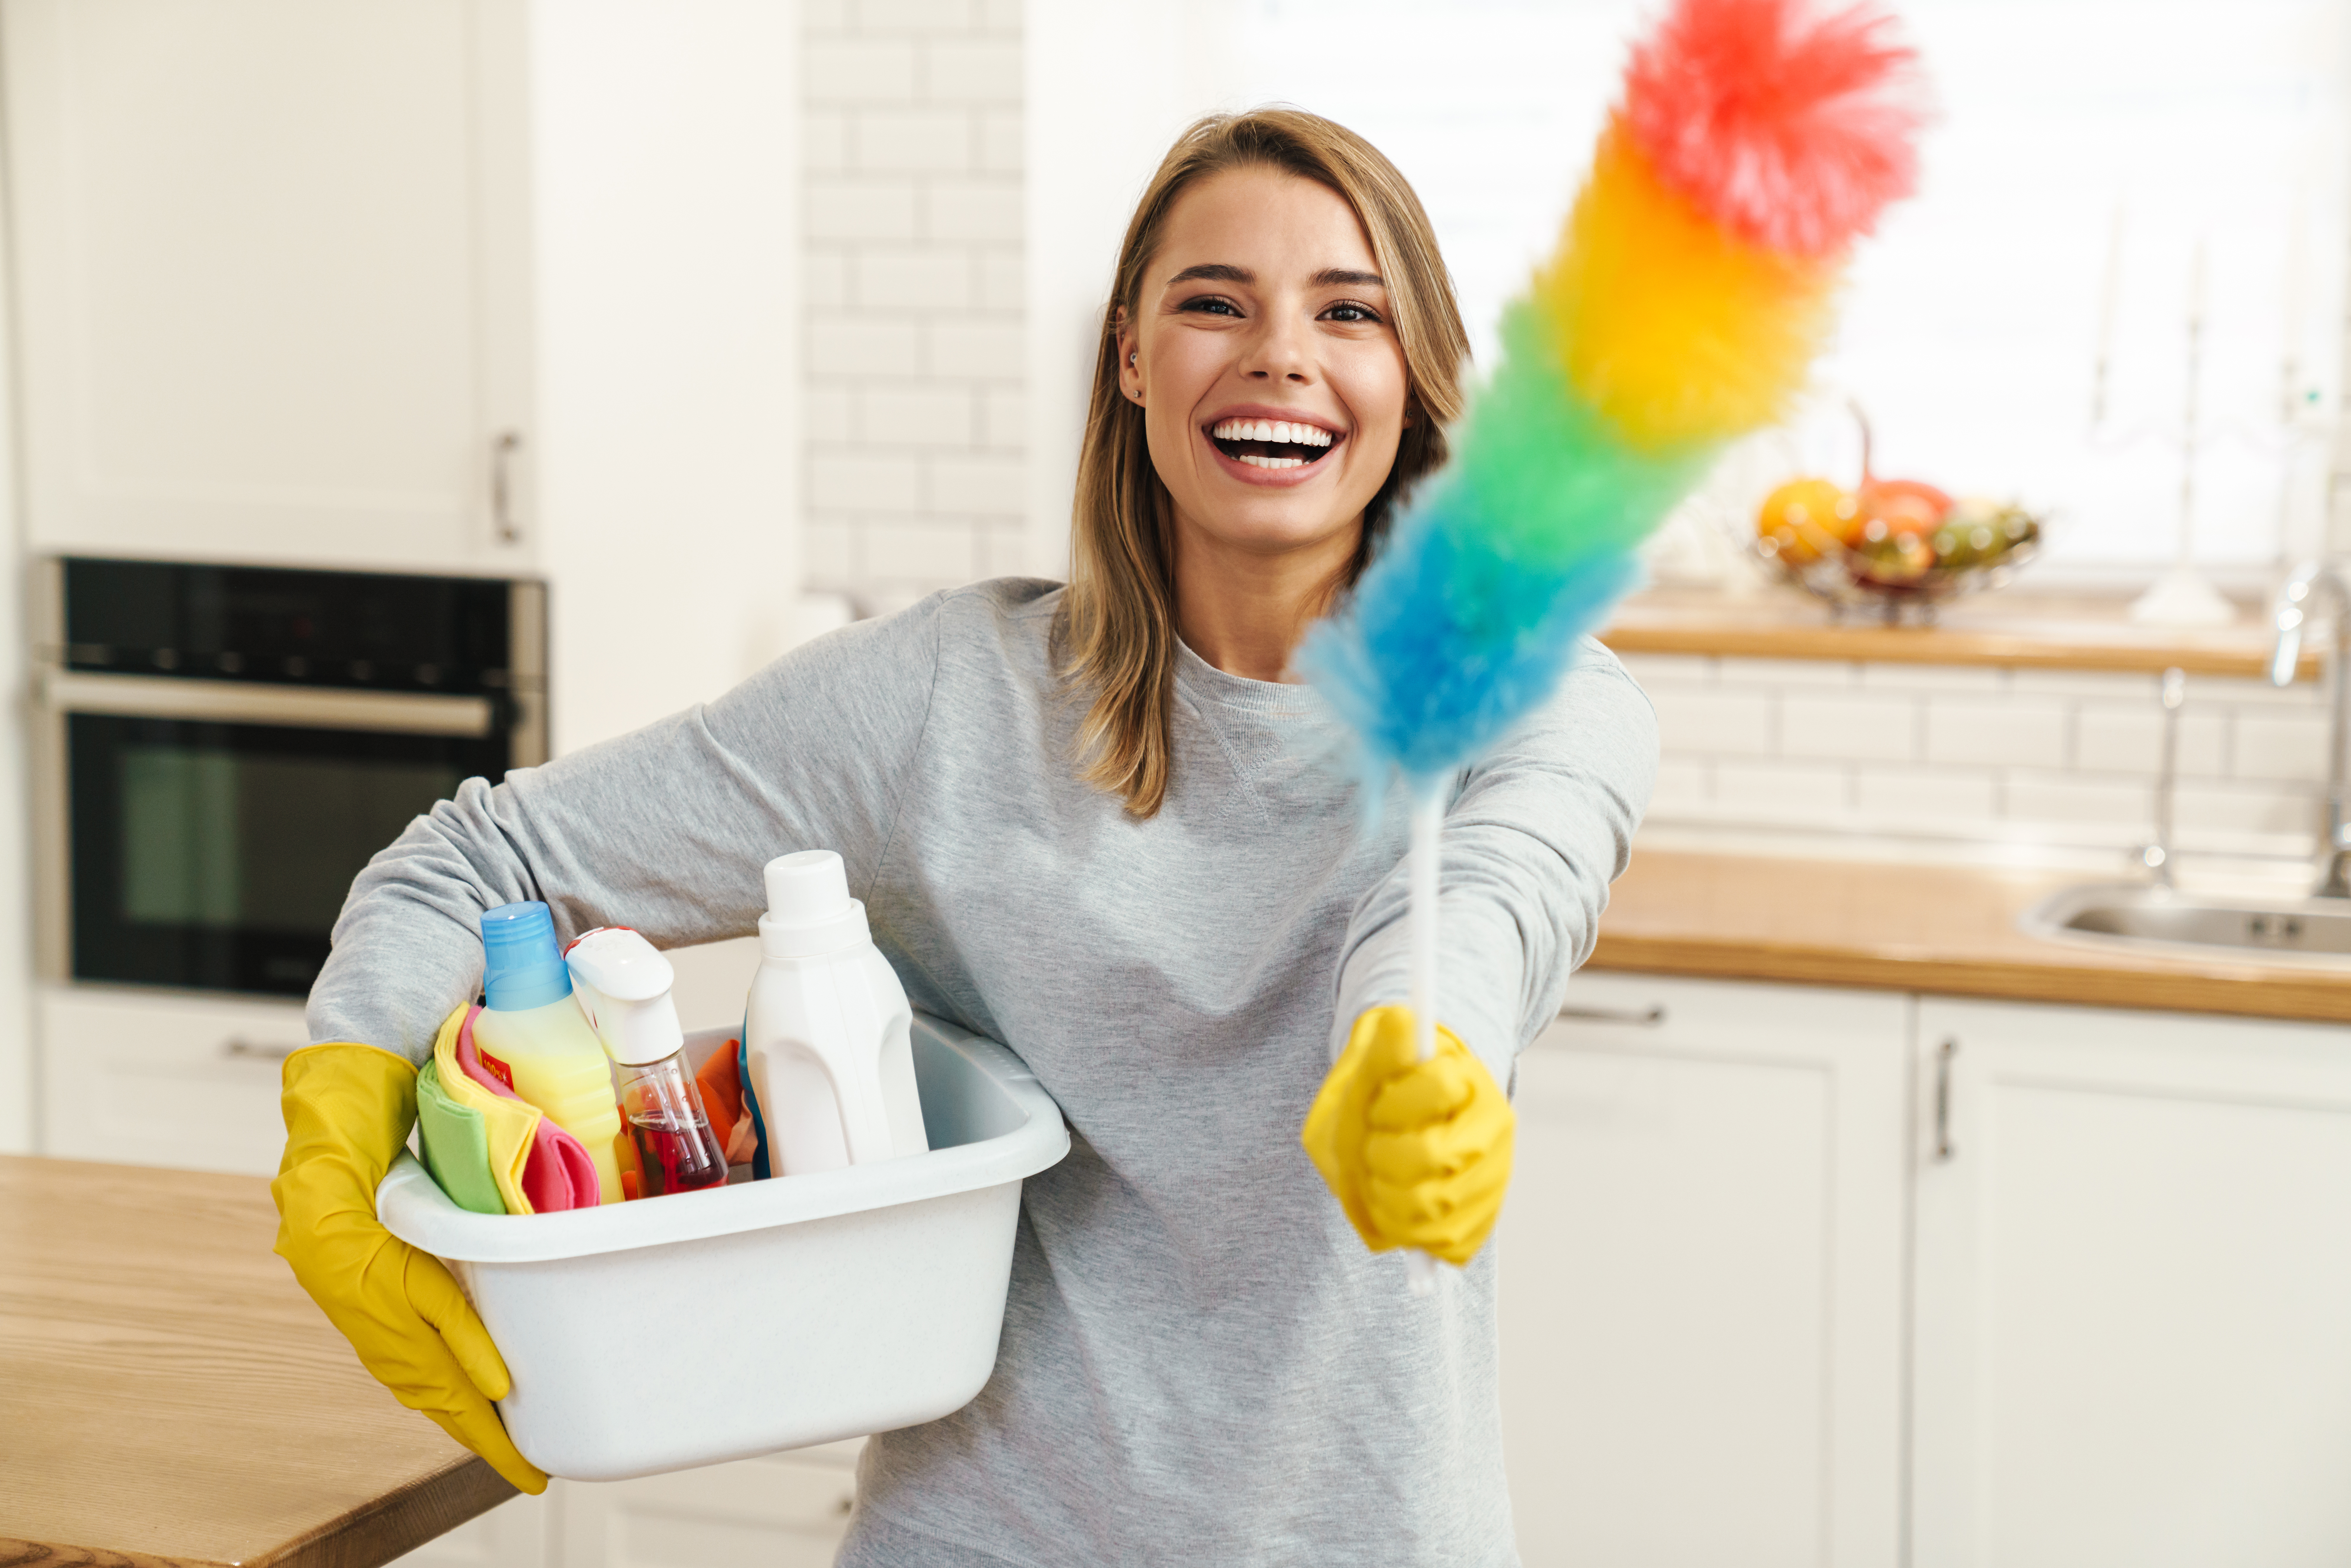 What will be the best career options for homemakers